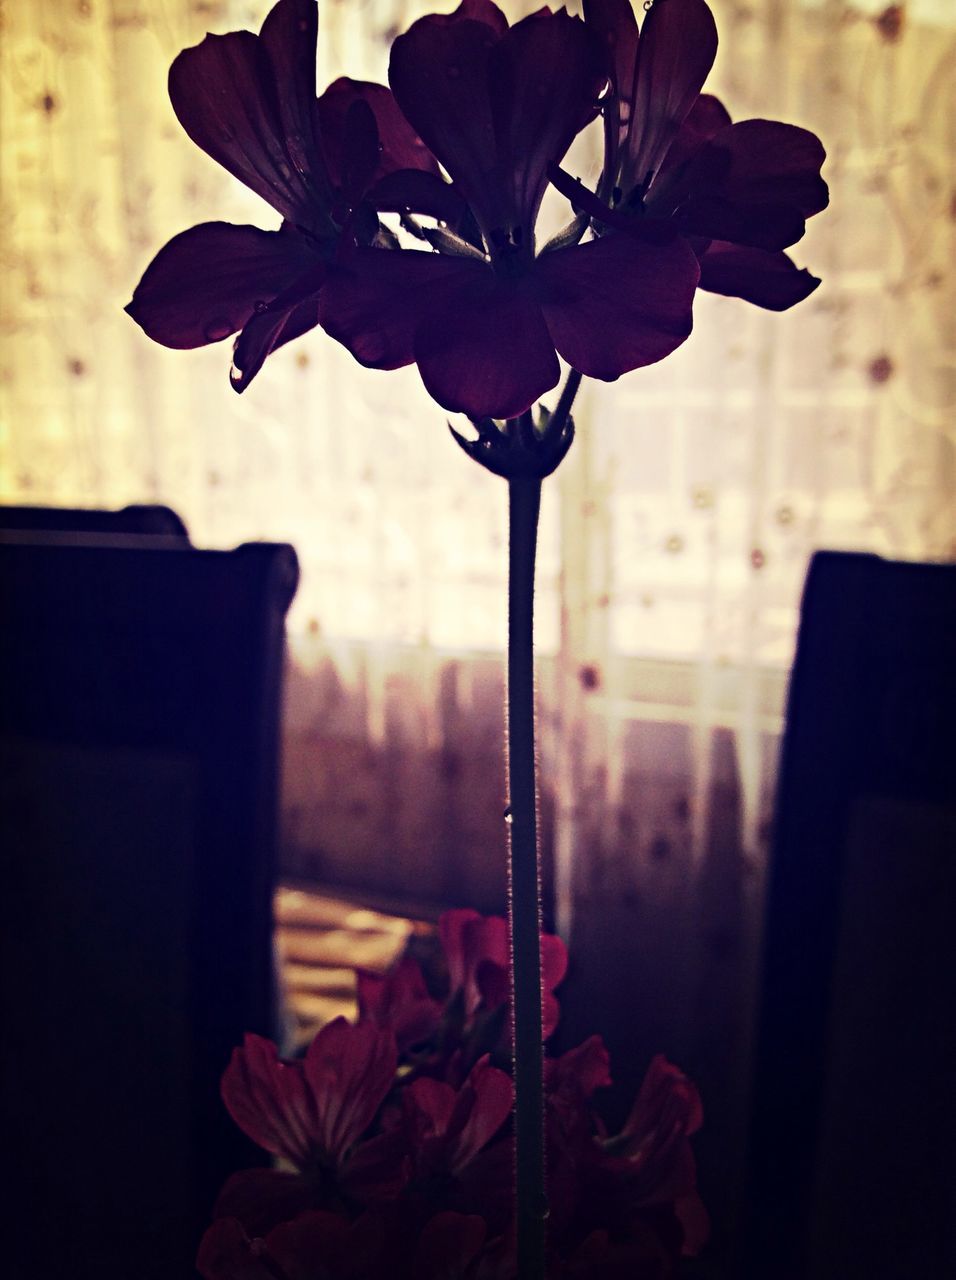 flower, petal, close-up, fragility, flower head, focus on foreground, indoors, plant, freshness, growth, stem, nature, home interior, wall - building feature, no people, beauty in nature, red, rose - flower, single flower, window